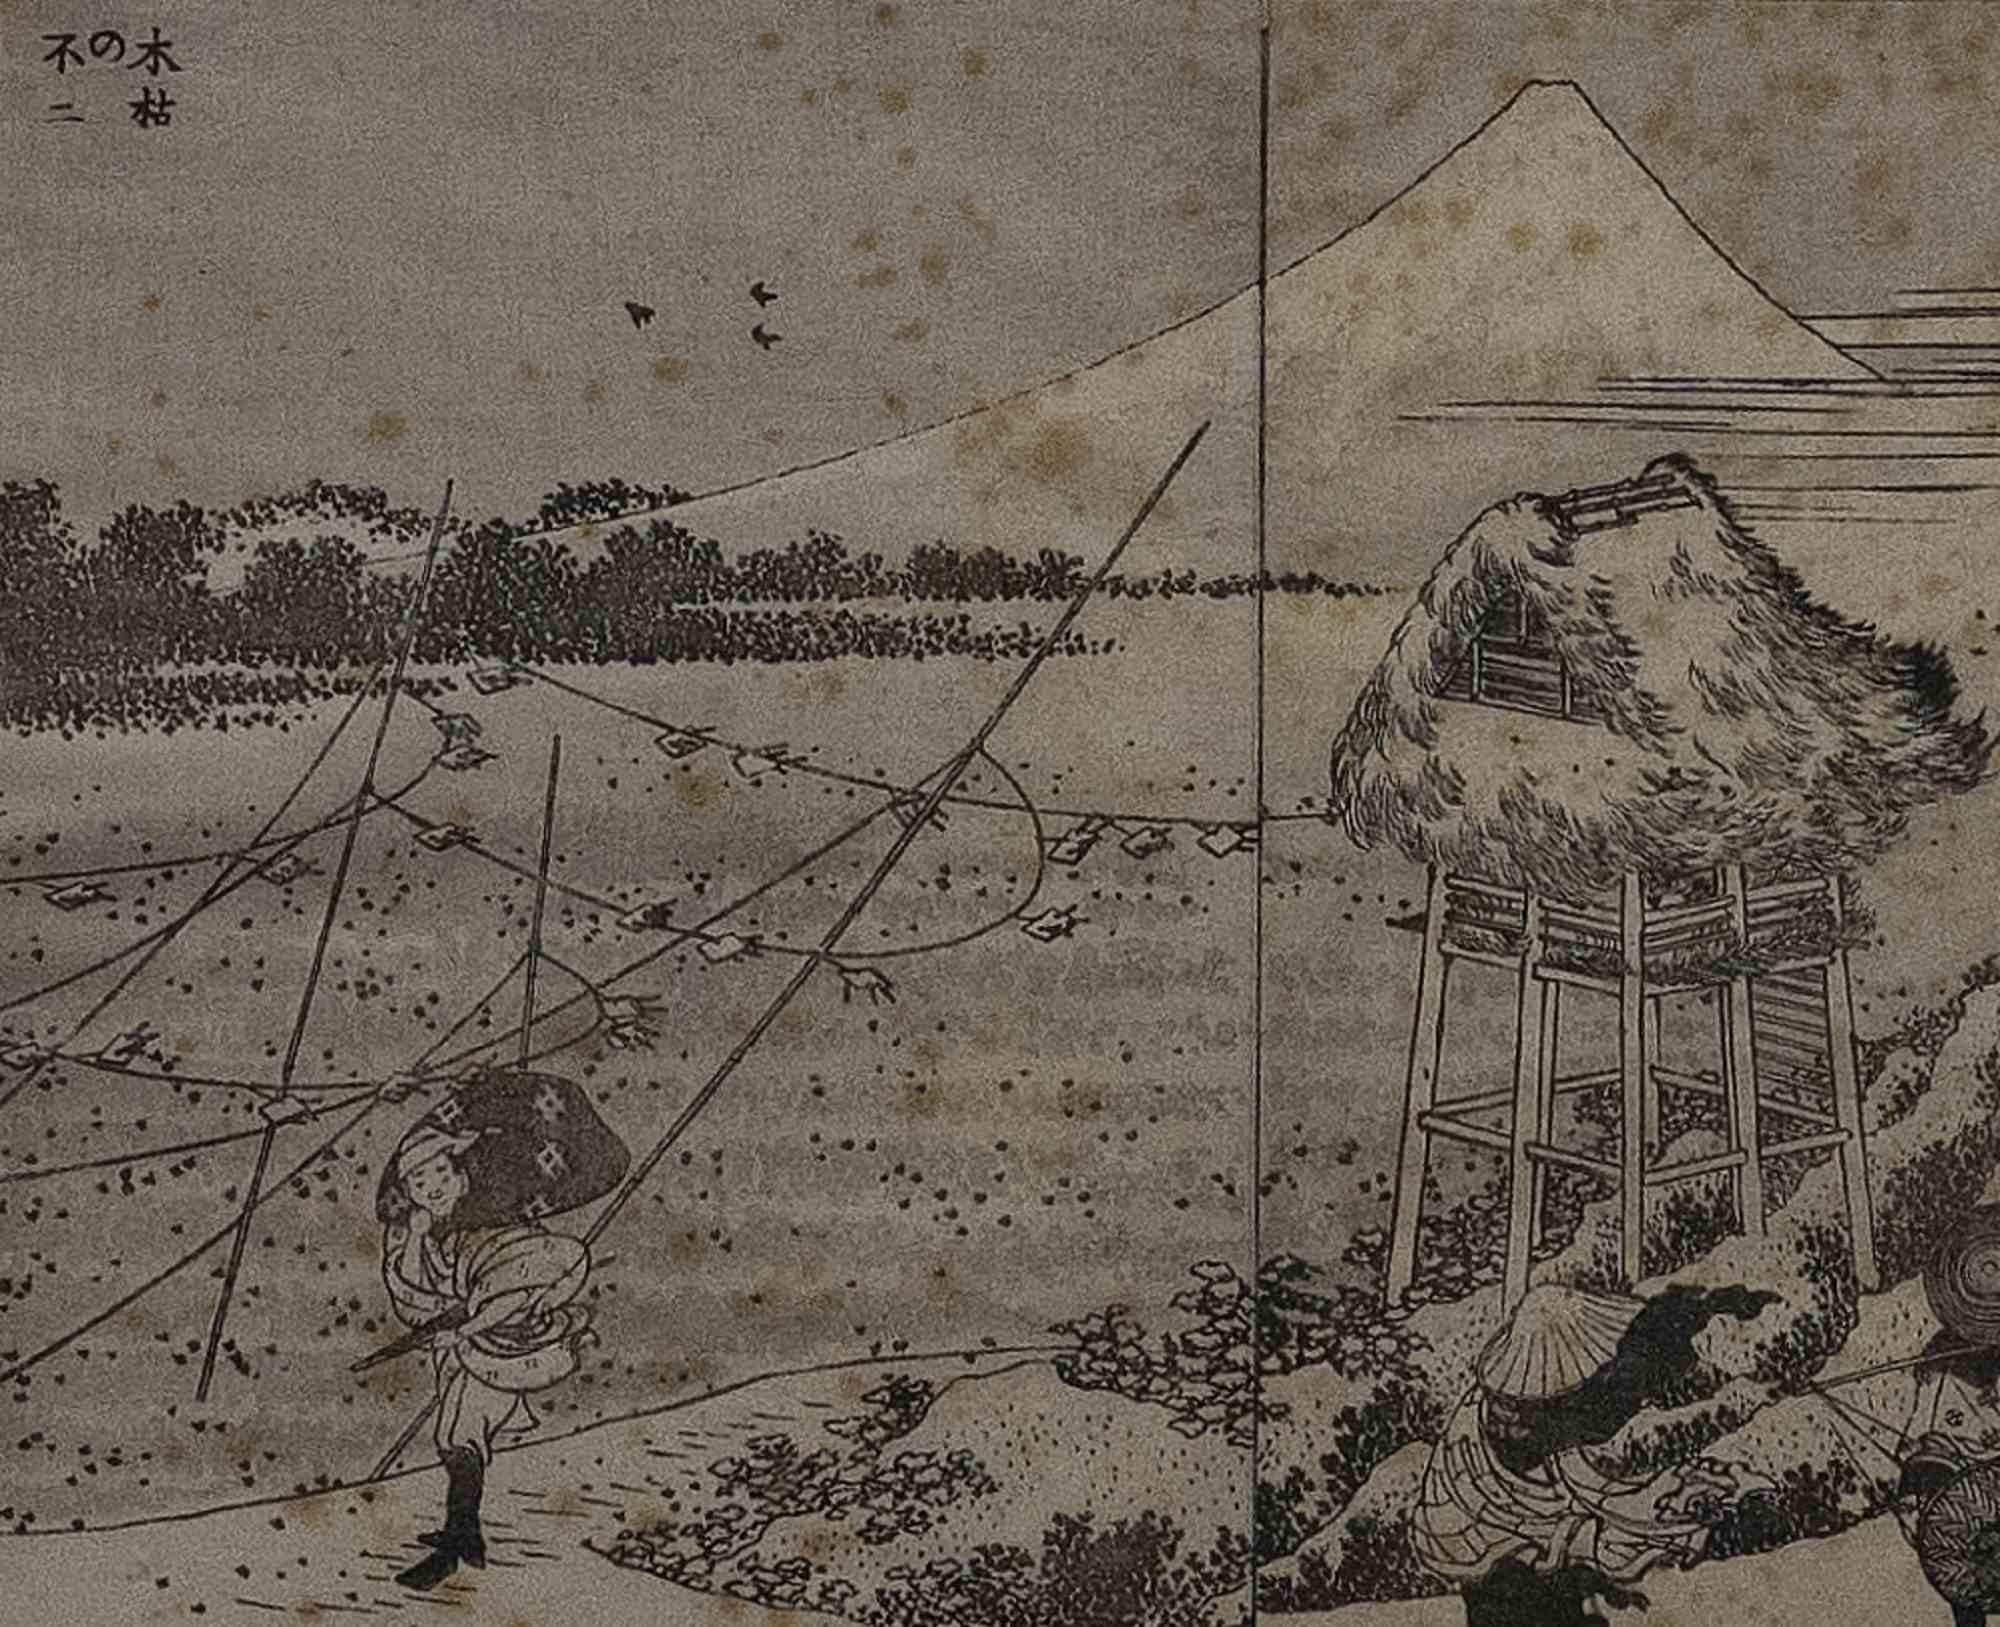 View of Mount Fuji in Winter is a woodcut print realized by Katsushika Hokusai in the early 19th Century, probably around 1835.

From the book 